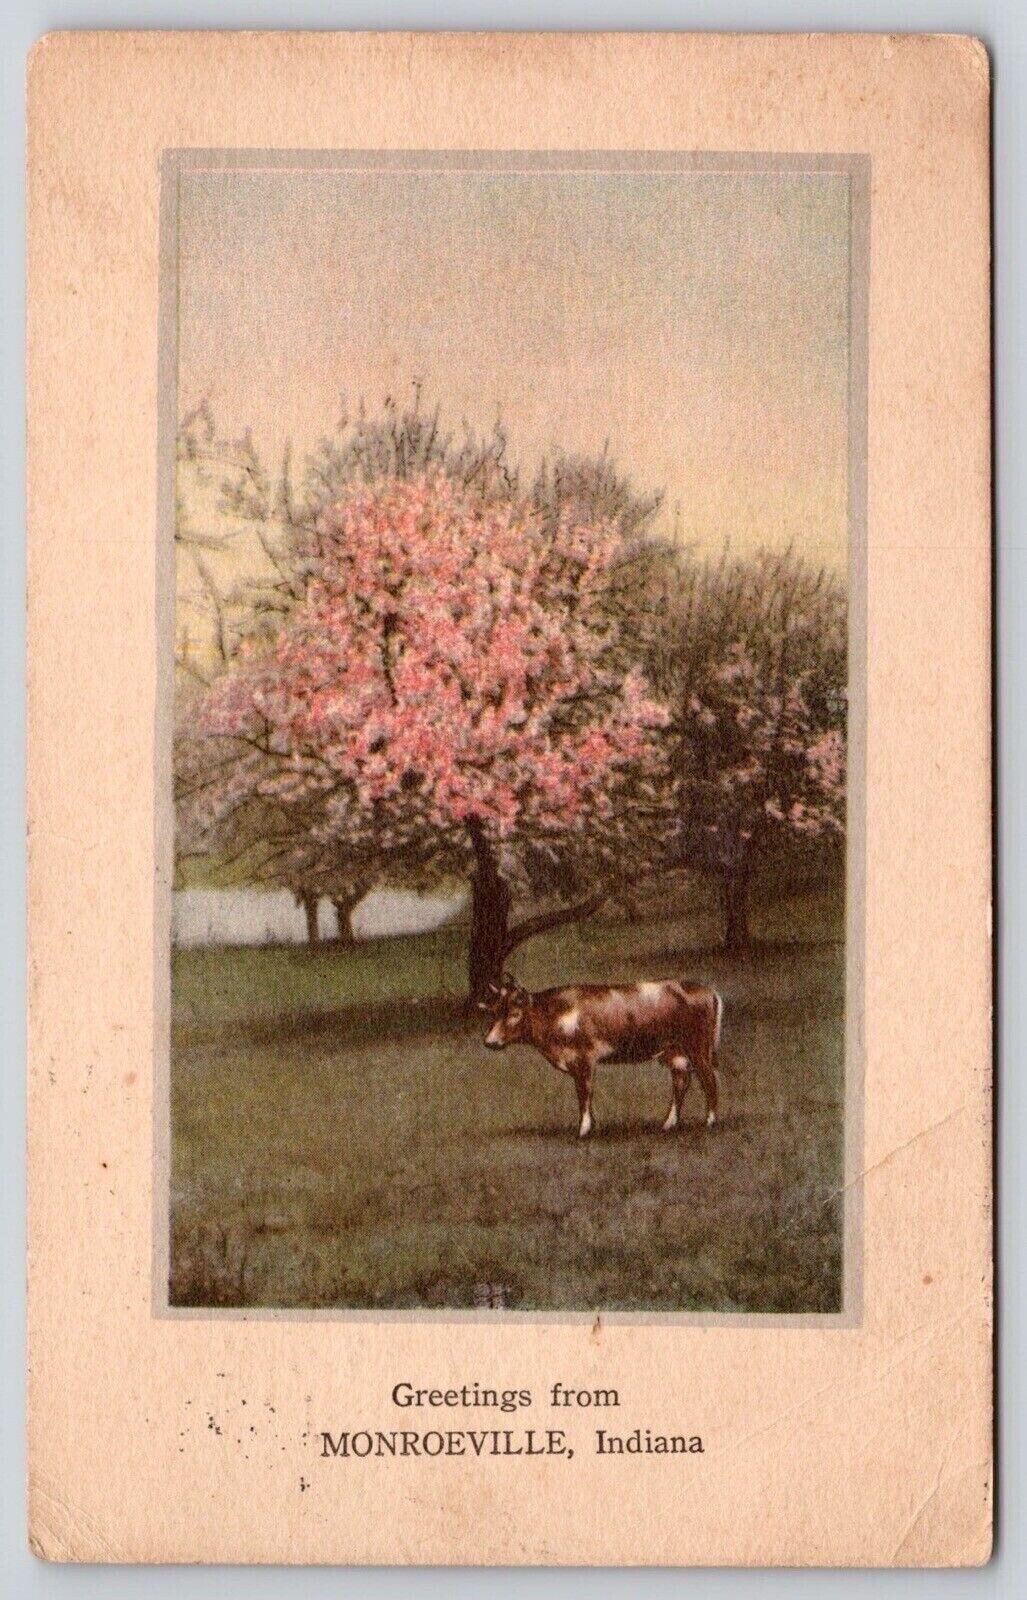 Greetings Monroeville Indiana Scenic Landscape Cow DB Cancel WOB Postcard